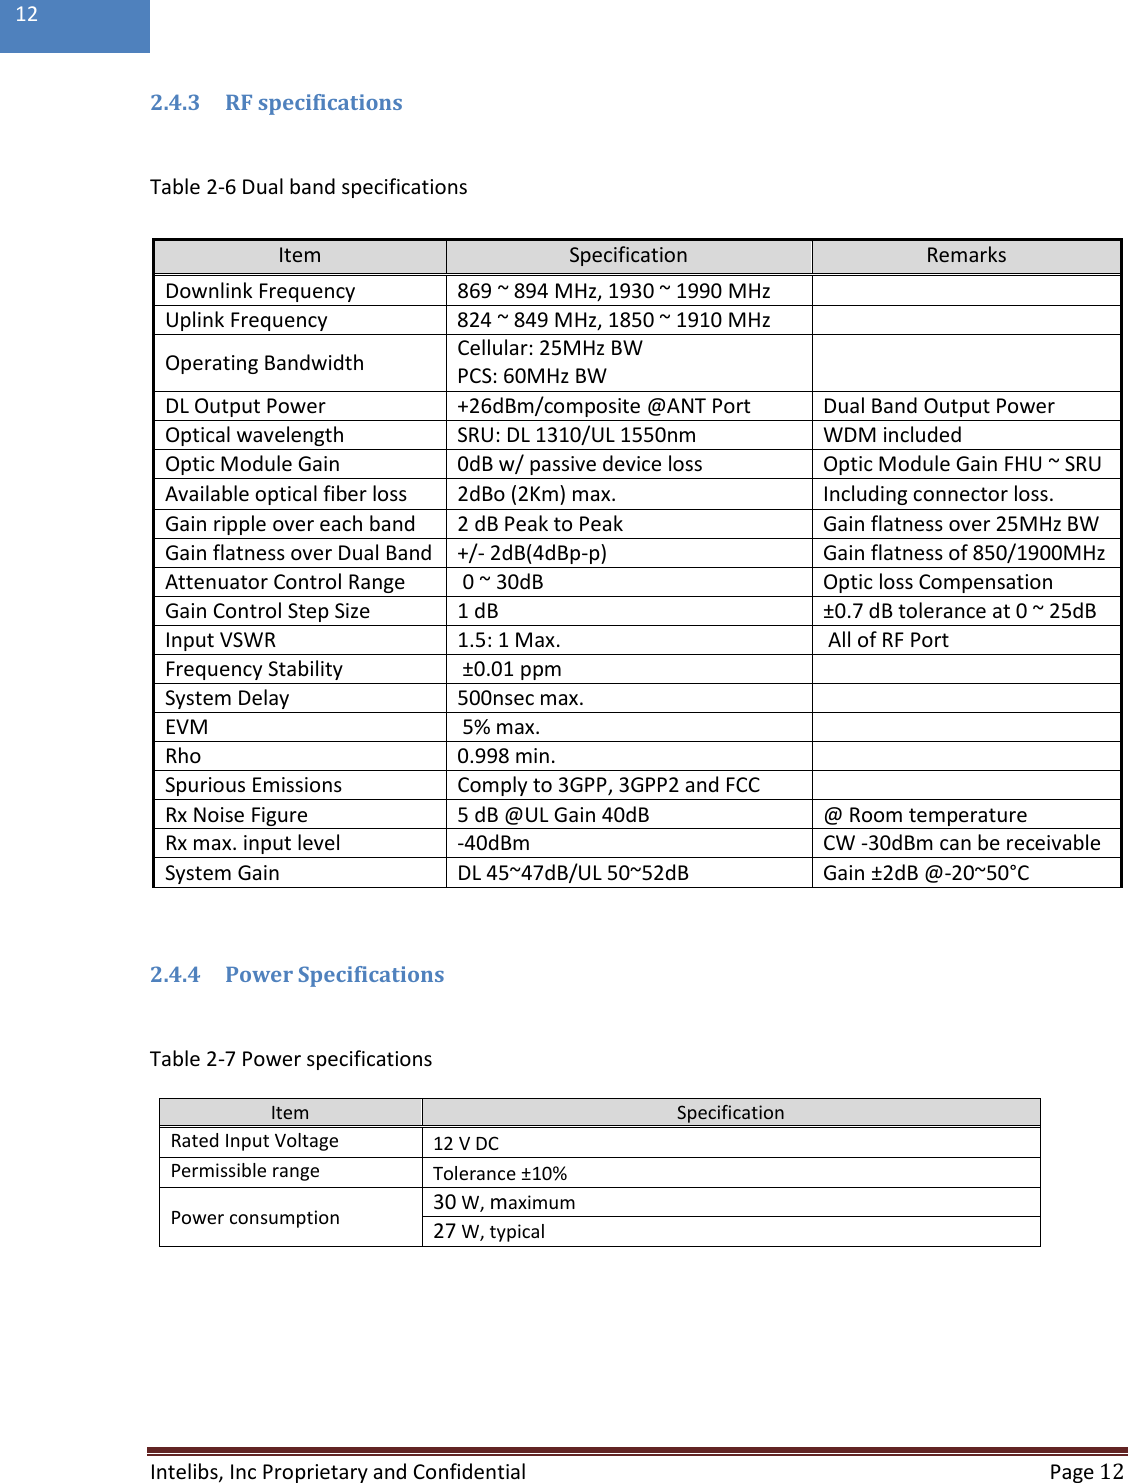  Intelibs, Inc Proprietary and Confidential  Page 12  12  2.4.3 RF specifications  Table 2-6 Dual band specifications  2.4.4 Power Specifications  Table 2-7 Power specifications Item Specification Rated Input Voltage  12 V DC Permissible range  Tolerance ±10% Power consumption 30 W, maximum 27 W, typical     Item Specification Remarks Downlink Frequency 869 ~ 894 MHz, 1930 ~ 1990 MHz  Uplink Frequency 824 ~ 849 MHz, 1850 ~ 1910 MHz   Operating Bandwidth Cellular: 25MHz BW PCS: 60MHz BW  DL Output Power +26dBm/composite @ANT Port Dual Band Output Power Optical wavelength SRU: DL 1310/UL 1550nm WDM included Optic Module Gain 0dB w/ passive device loss Optic Module Gain FHU ~ SRU  Available optical fiber loss  2dBo (2Km) max. Including connector loss. Gain ripple over each band 2 dB Peak to Peak  Gain flatness over 25MHz BW Gain flatness over Dual Band +/- 2dB(4dBp-p) Gain flatness of 850/1900MHz  Attenuator Control Range  0 ~ 30dB Optic loss Compensation Gain Control Step Size  1 dB ±0.7 dB tolerance at 0 ~ 25dB Input VSWR 1.5: 1 Max.  All of RF Port Frequency Stability  ±0.01 ppm   System Delay 500nsec max.  EVM  5% max.  Rho  0.998 min.   Spurious Emissions Comply to 3GPP, 3GPP2 and FCC  Rx Noise Figure 5 dB @UL Gain 40dB @ Room temperature Rx max. input level -40dBm CW -30dBm can be receivable System Gain DL 45~47dB/UL 50~52dB Gain ±2dB @-20~50°C 